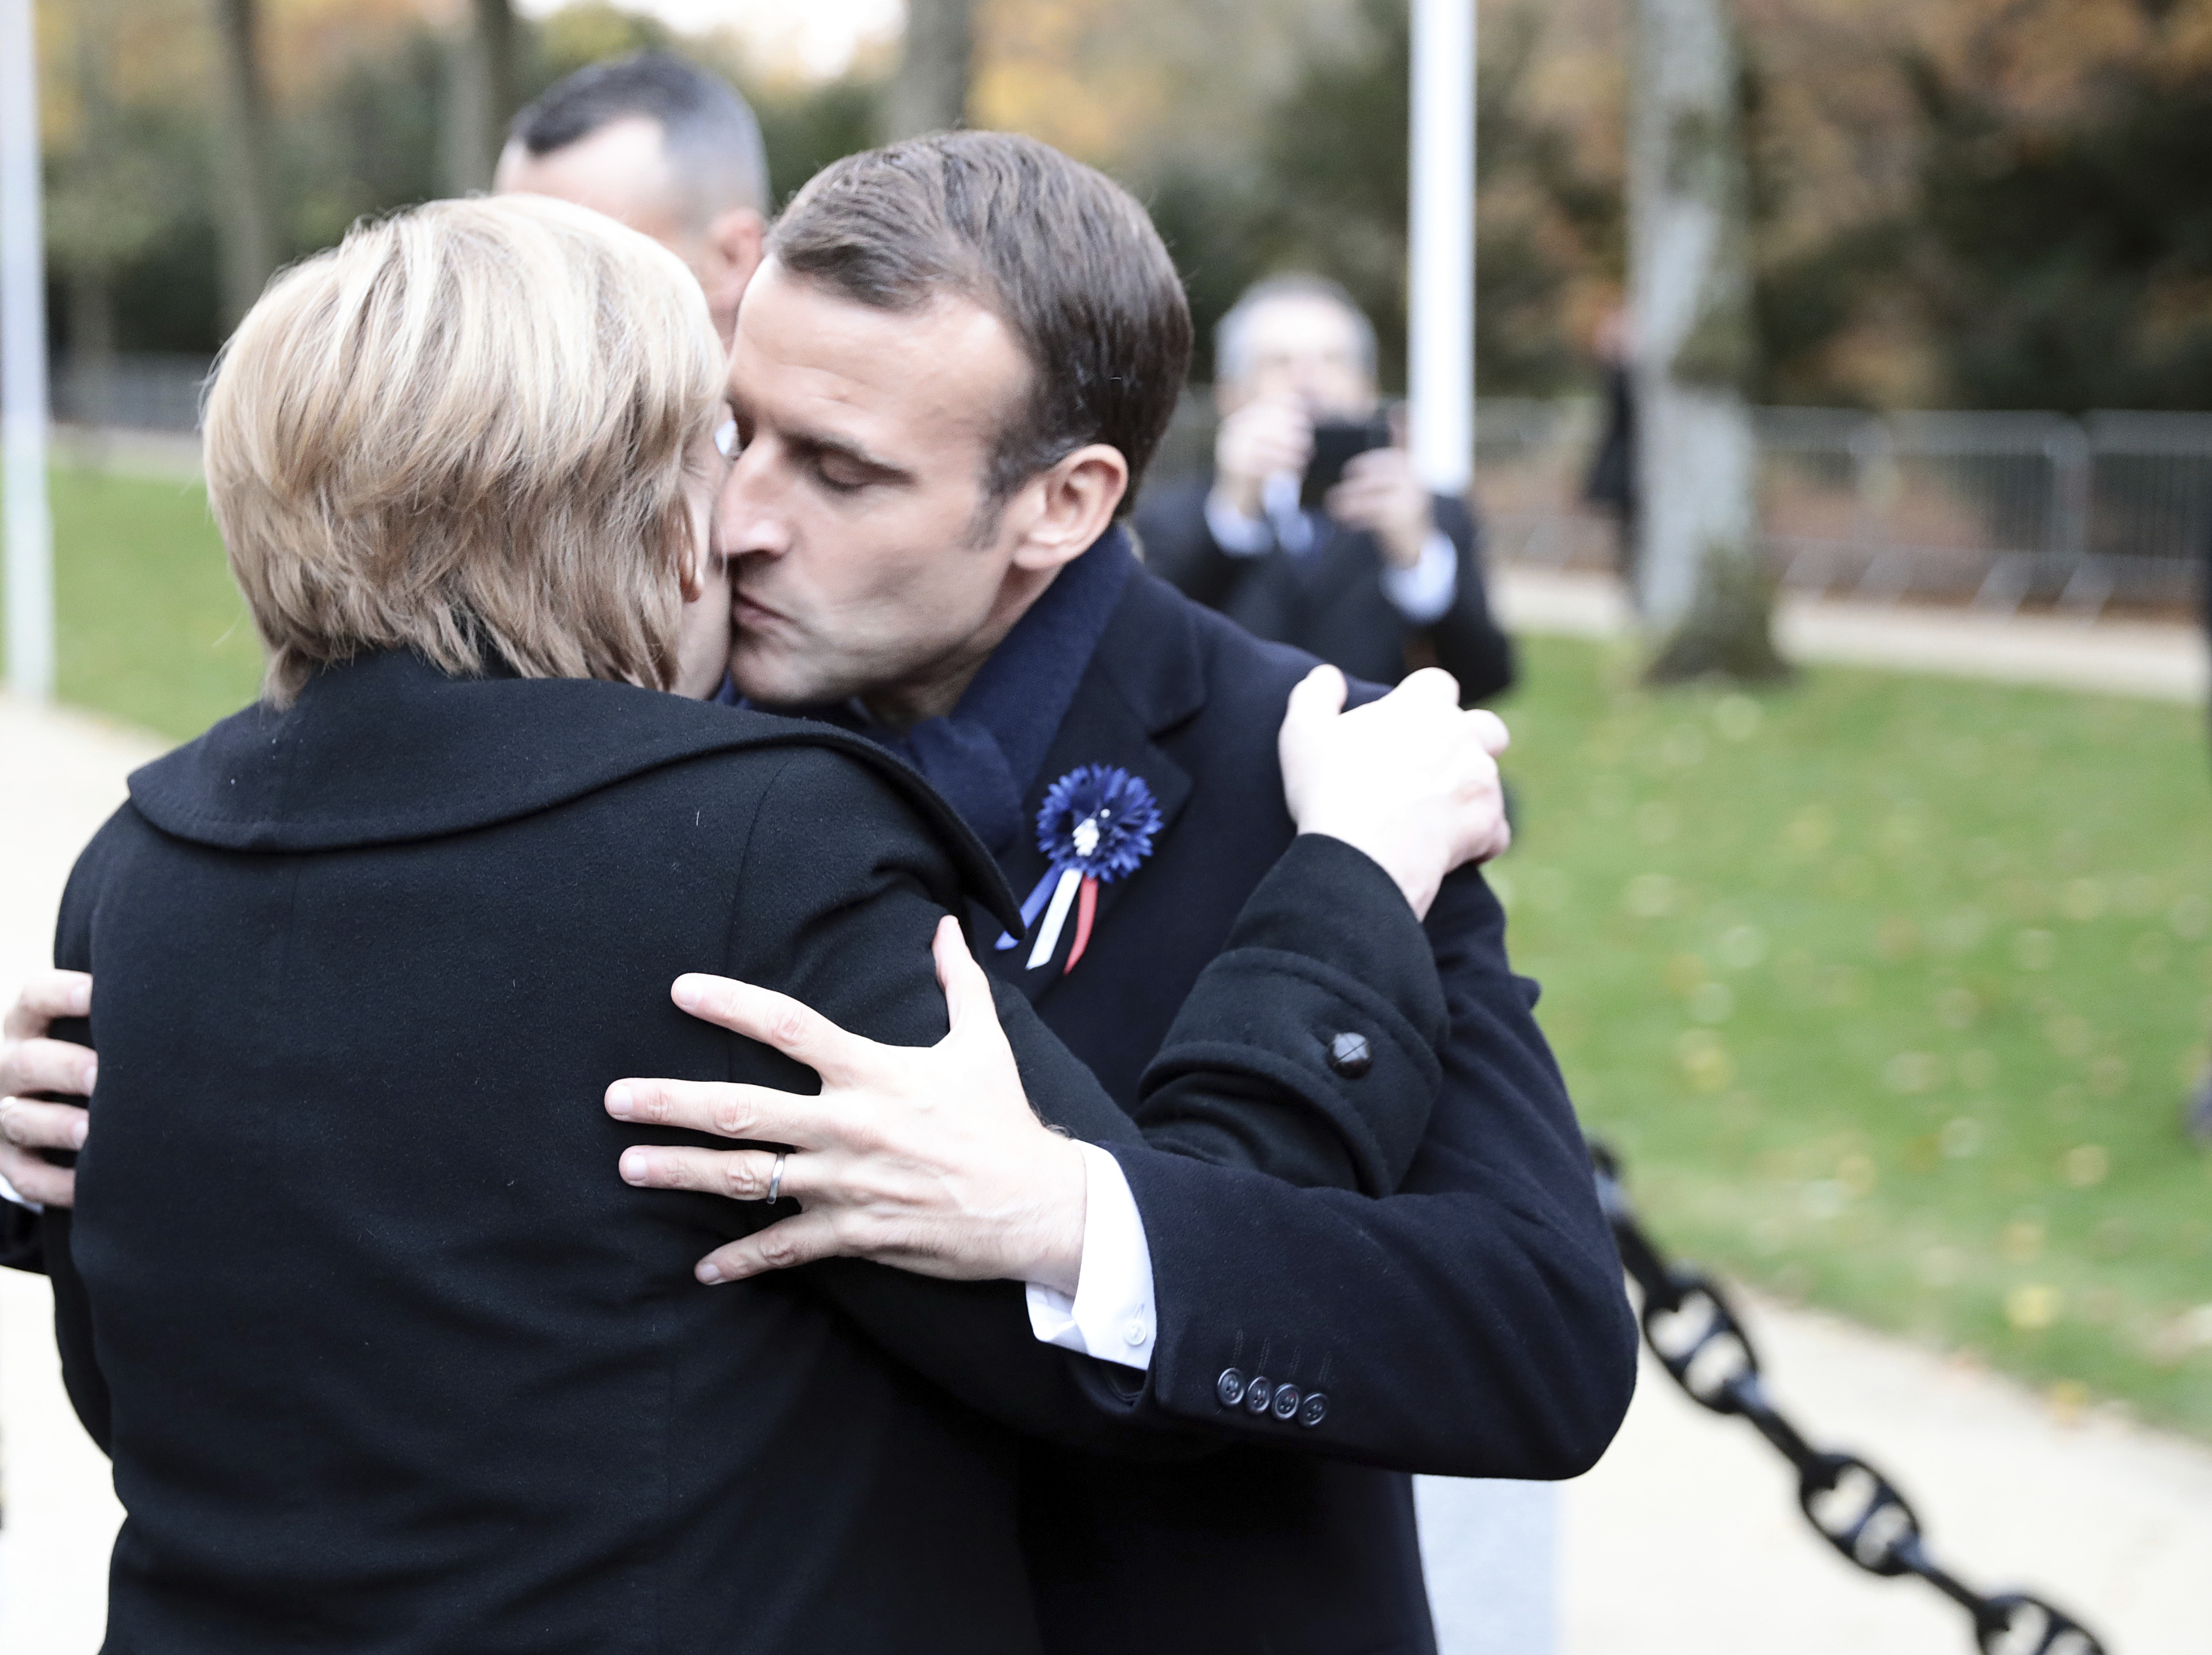 10 November 2018, France, Compiegne: Chancellor Angela Merkel (CDU) and French President Emmanuel Macron embrace near the northern French town of Compi'gne after commemorating the end of the First World War 100 years ago. The armistice was signed on 11 November 1918 in a converted dining car in the clearing. The memorial is located on this site. Photo by: Kay Nietfeld/picture-alliance/dpa/AP Images